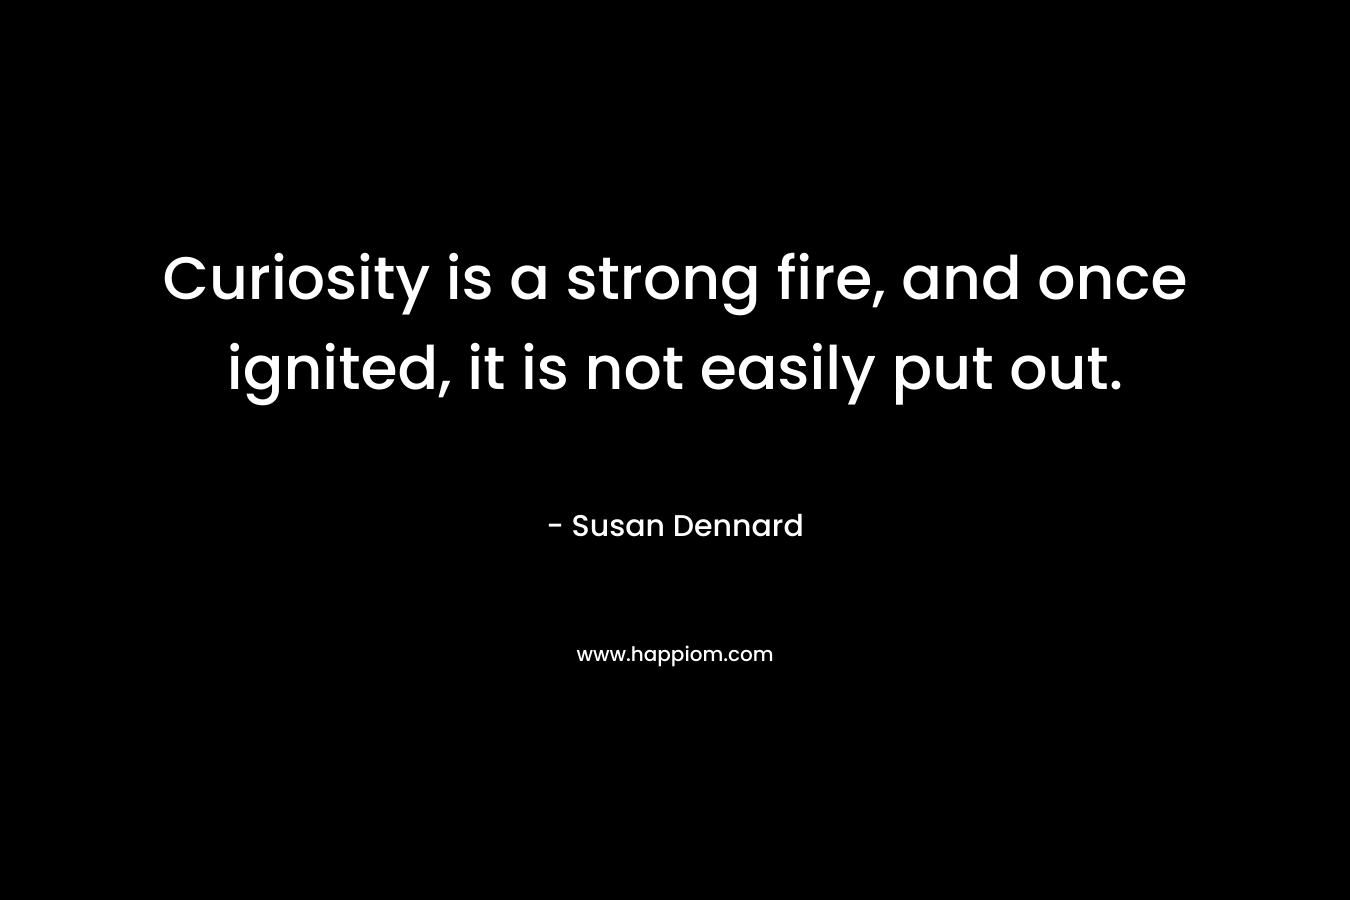 Curiosity is a strong fire, and once ignited, it is not easily put out. – Susan Dennard